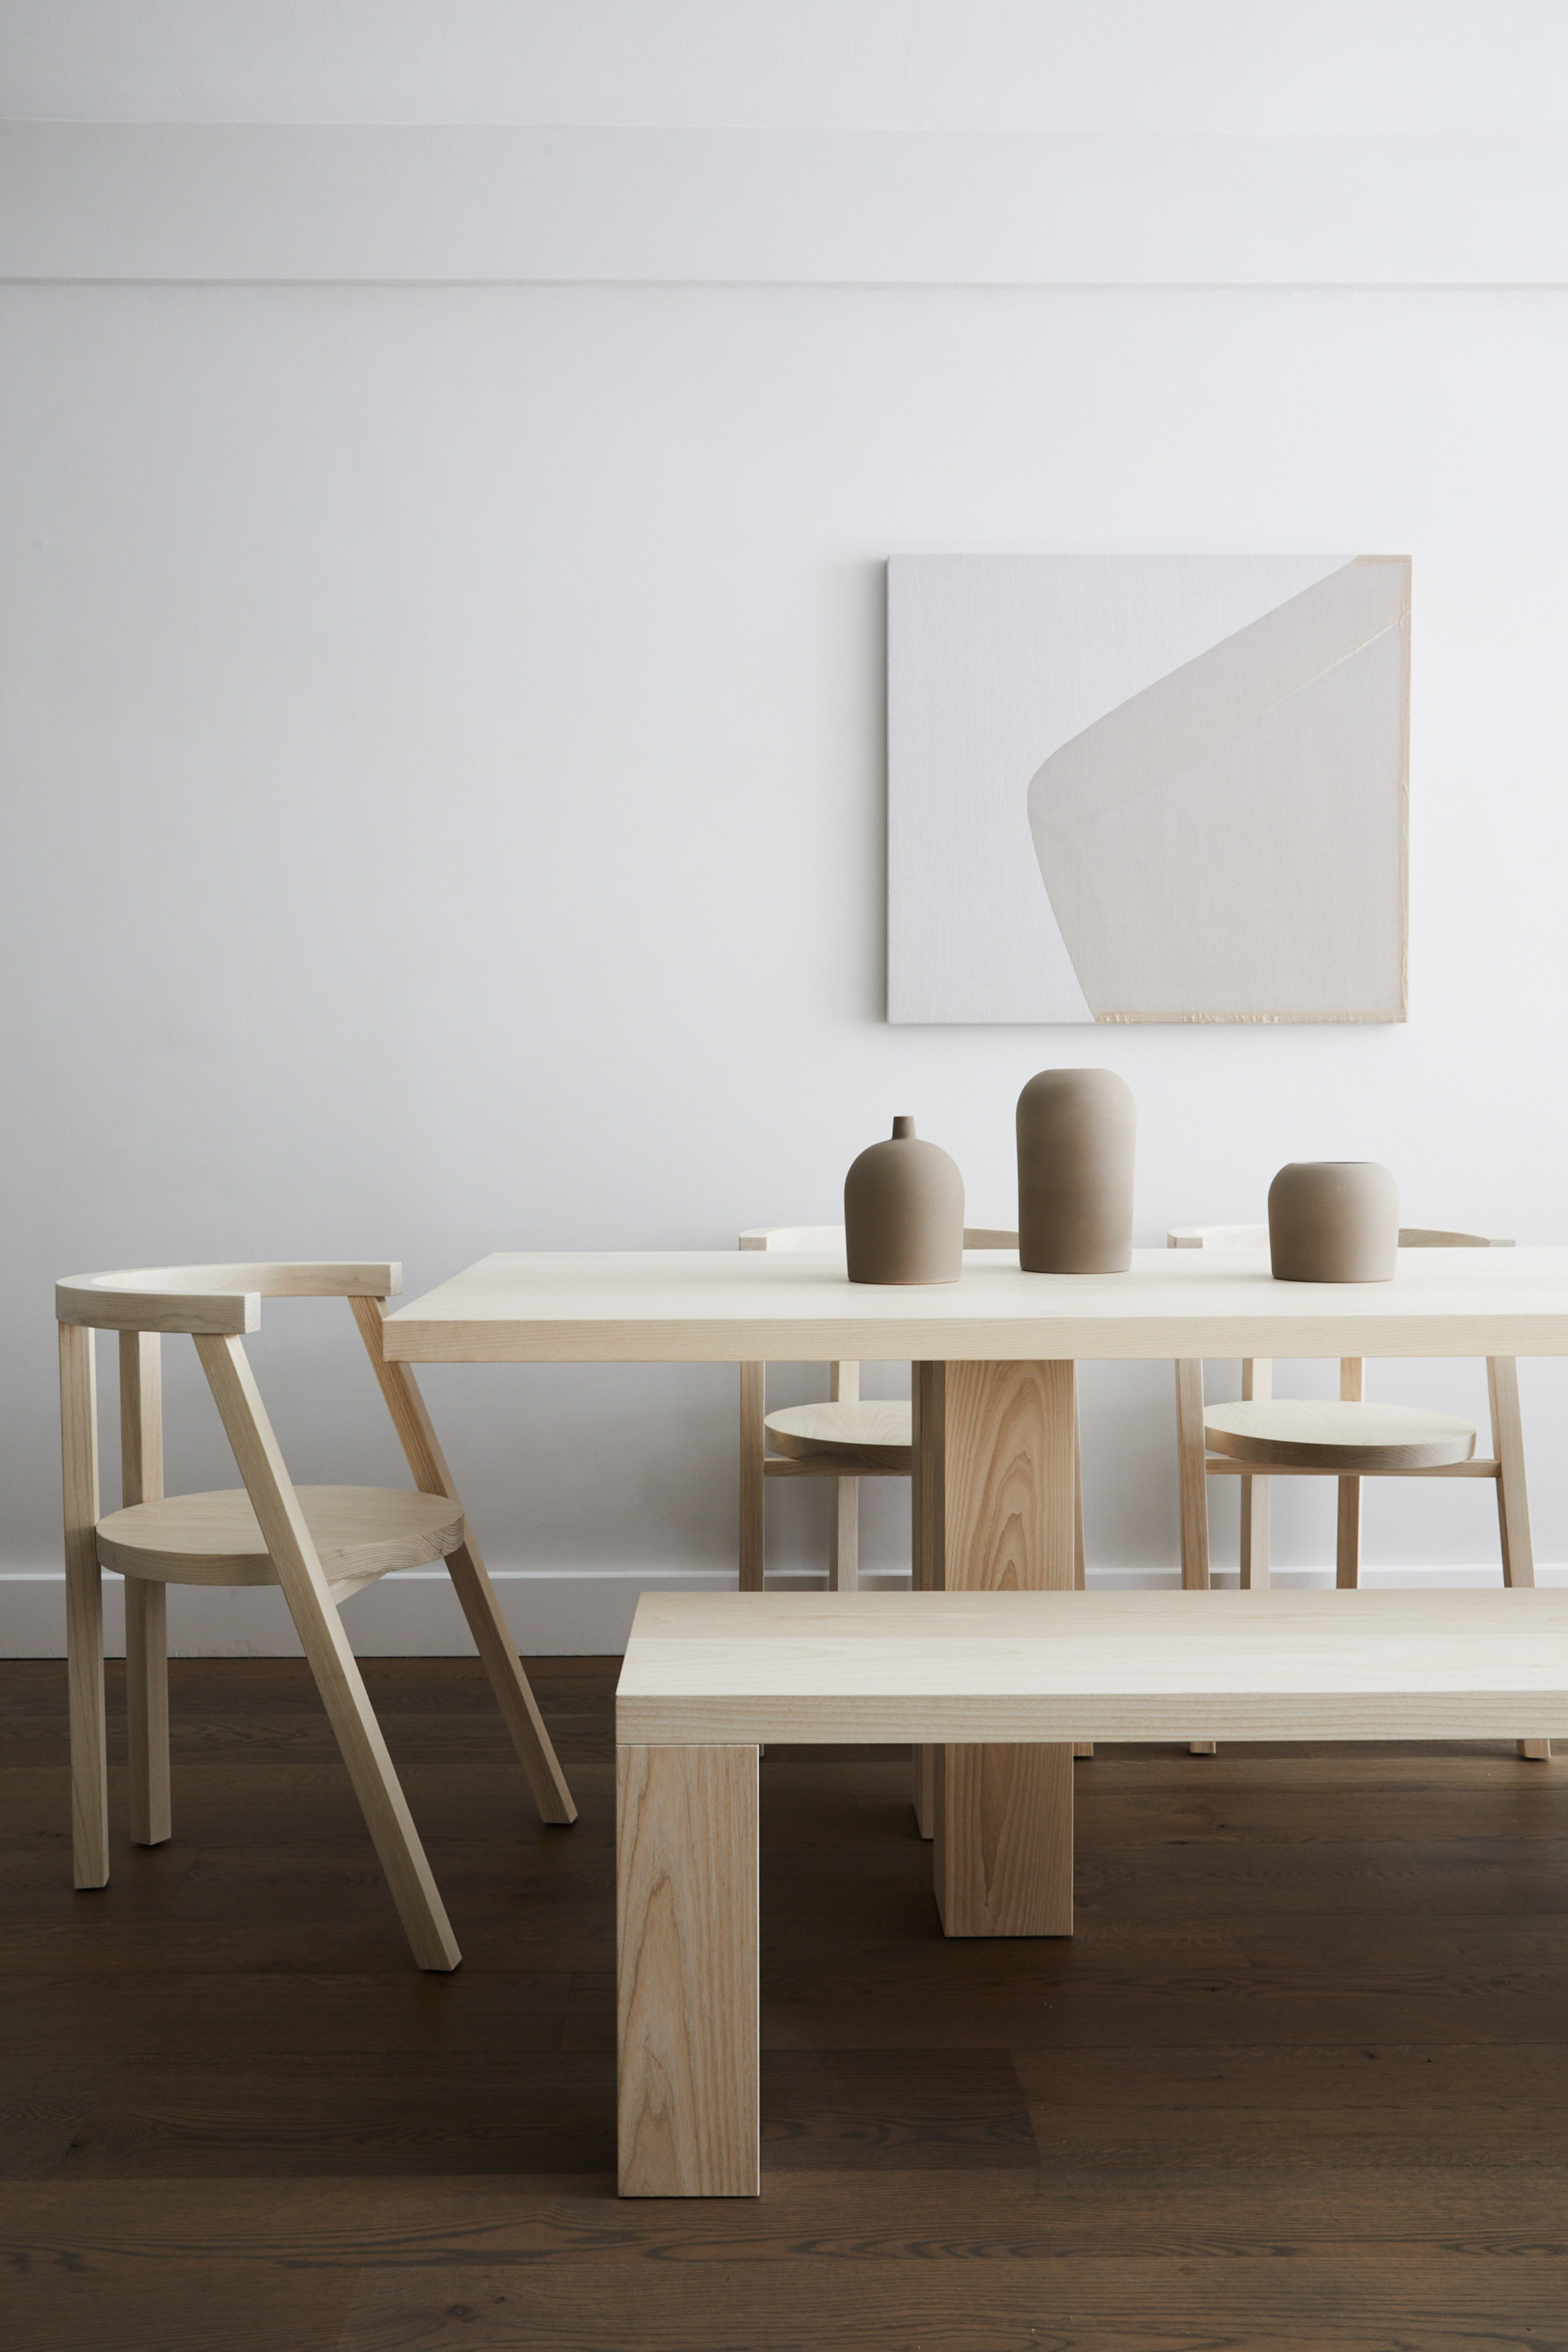 Pure Minimalist furniture collection takes cues from beach landscape of the Hamptons